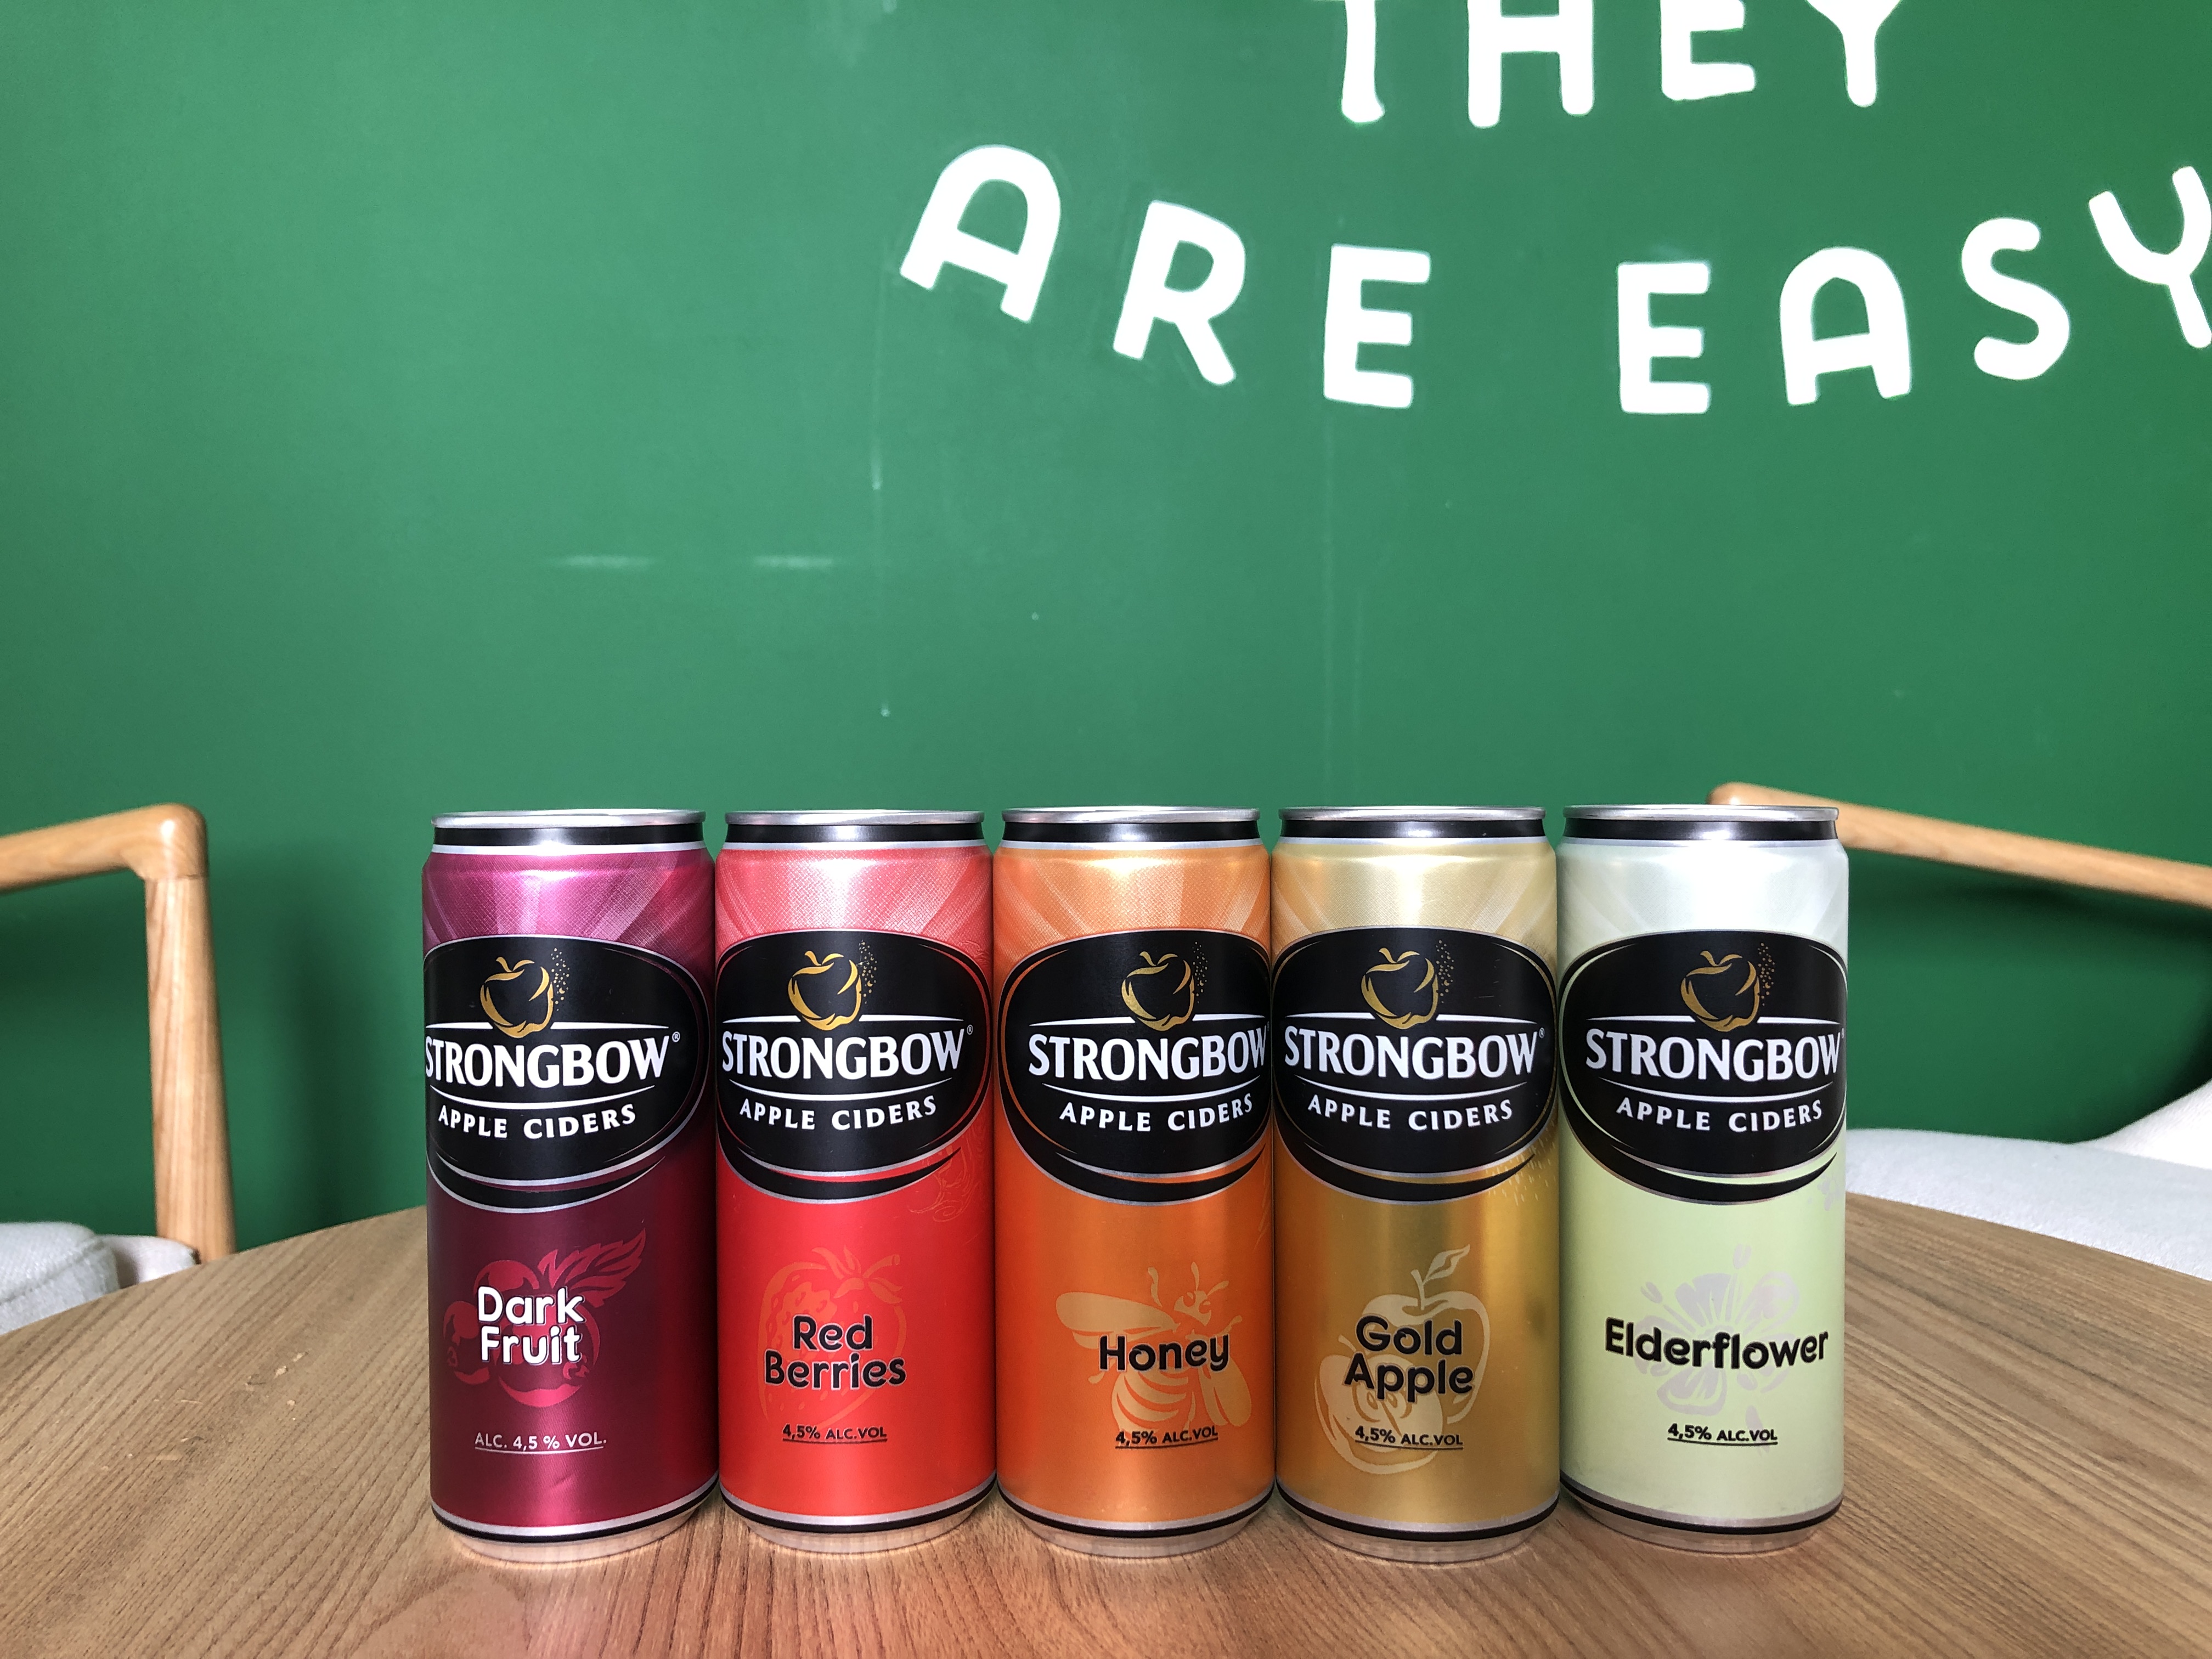 Nồng độ cồn của bia Strongbow